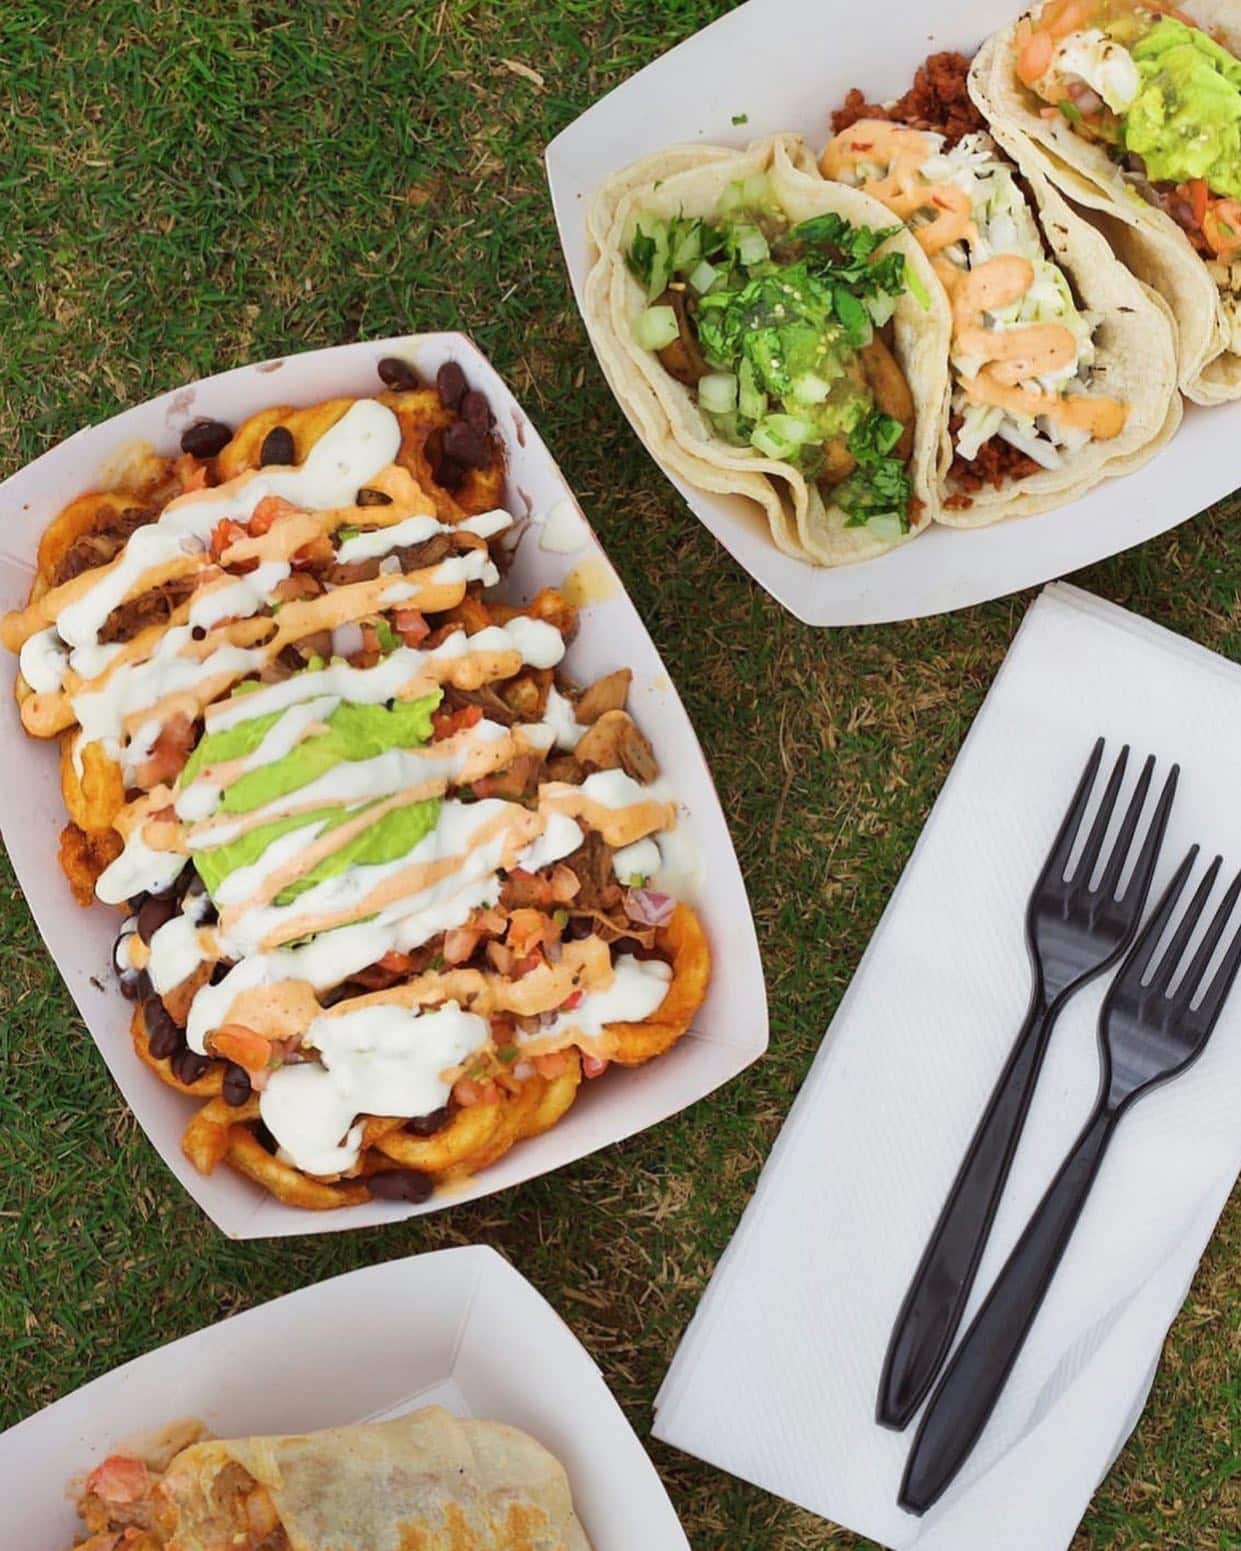 Mexican cuisine from 5 Elementos food truck